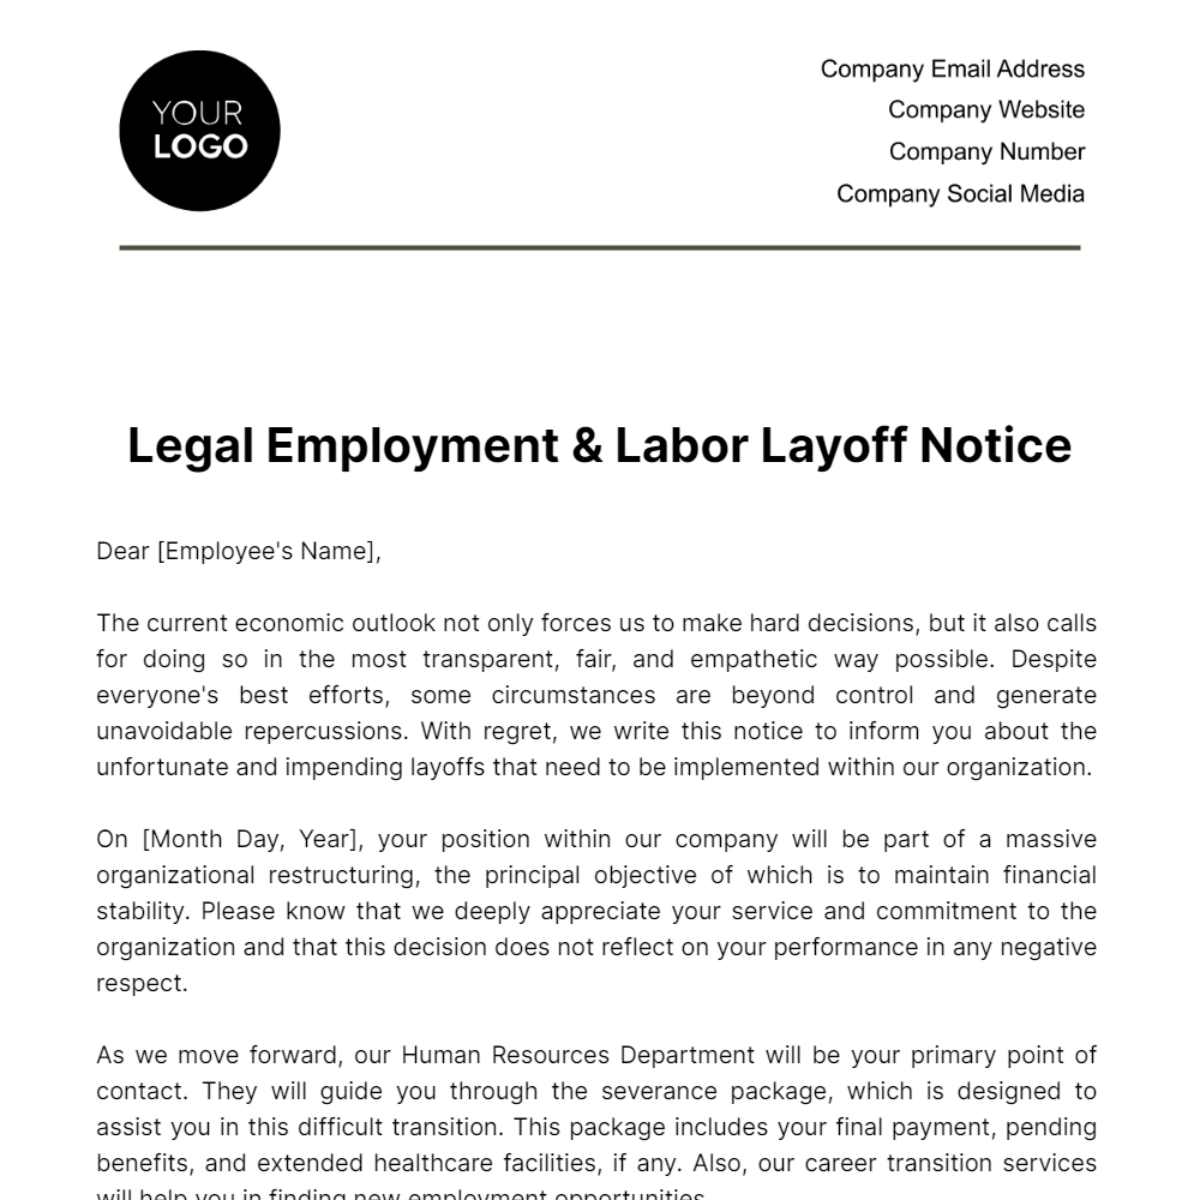 Legal Employment & Labor Layoff Notice Template